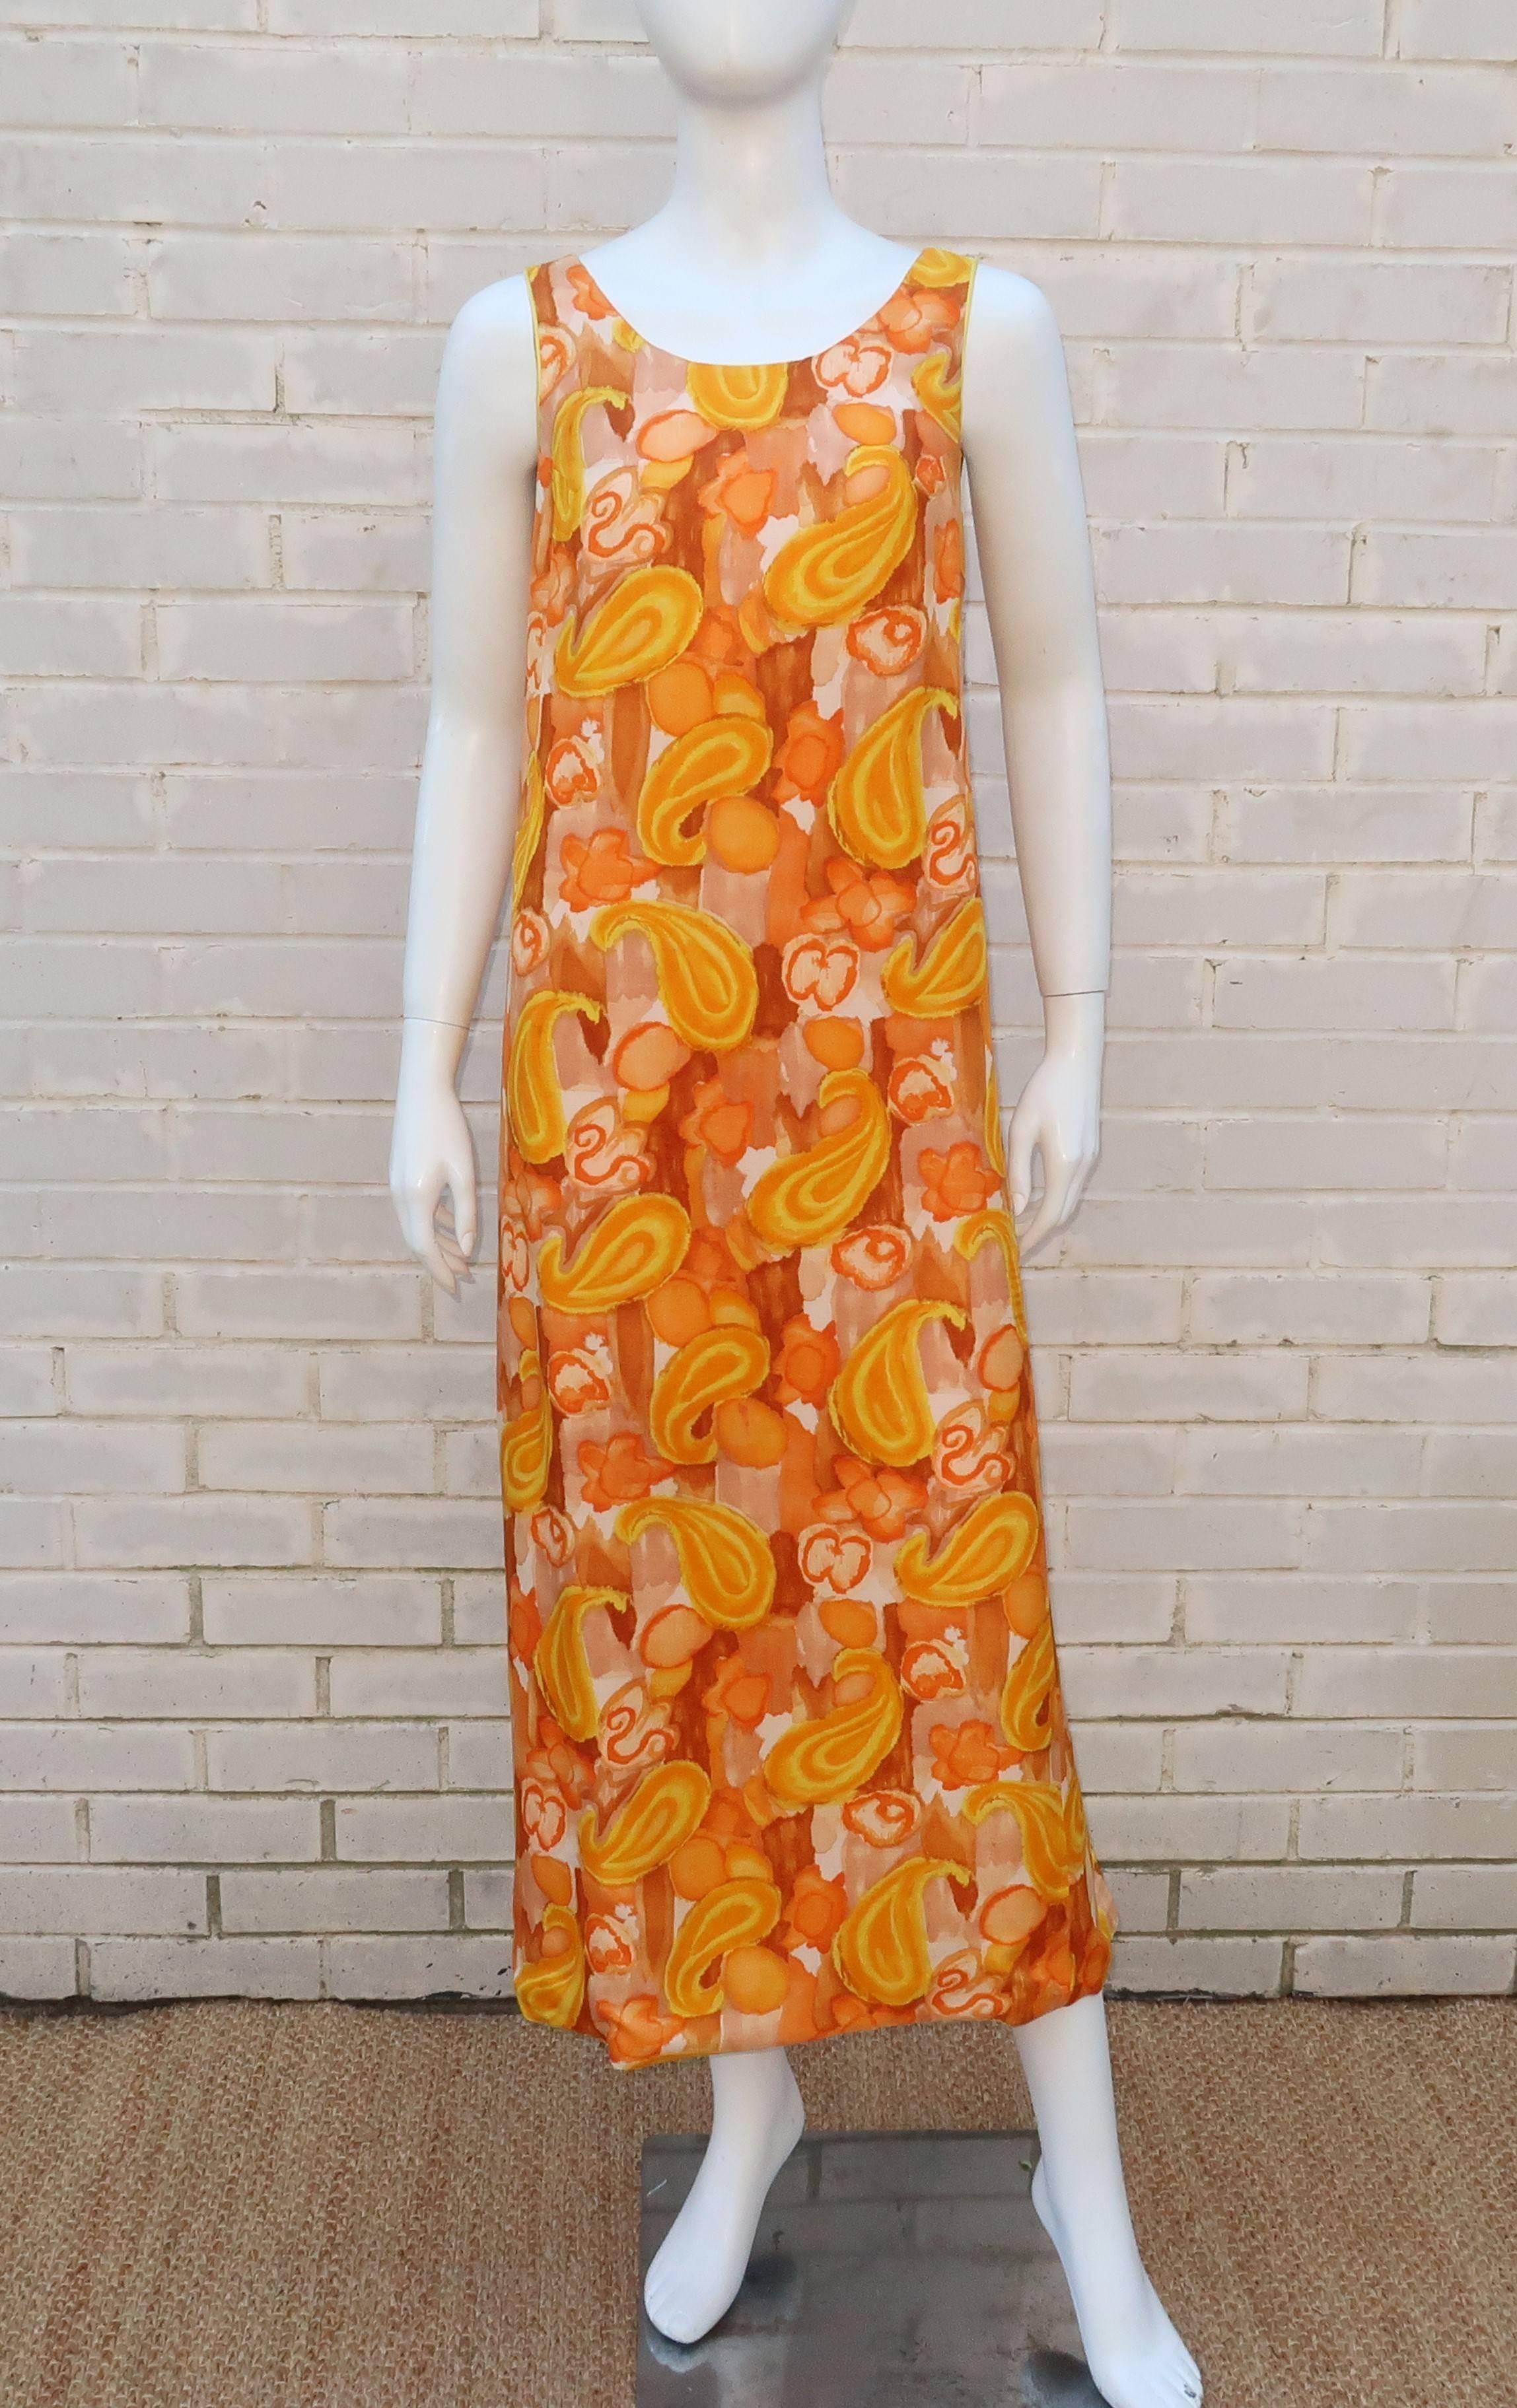 This 1960's apron style caftan is like a sunny day.  The mod floral and paisley print is infused with bright yellow and orange accented by light brown.  The synthetic fabric has the look and feel of dupioni silk and is fully lined in orange.  The